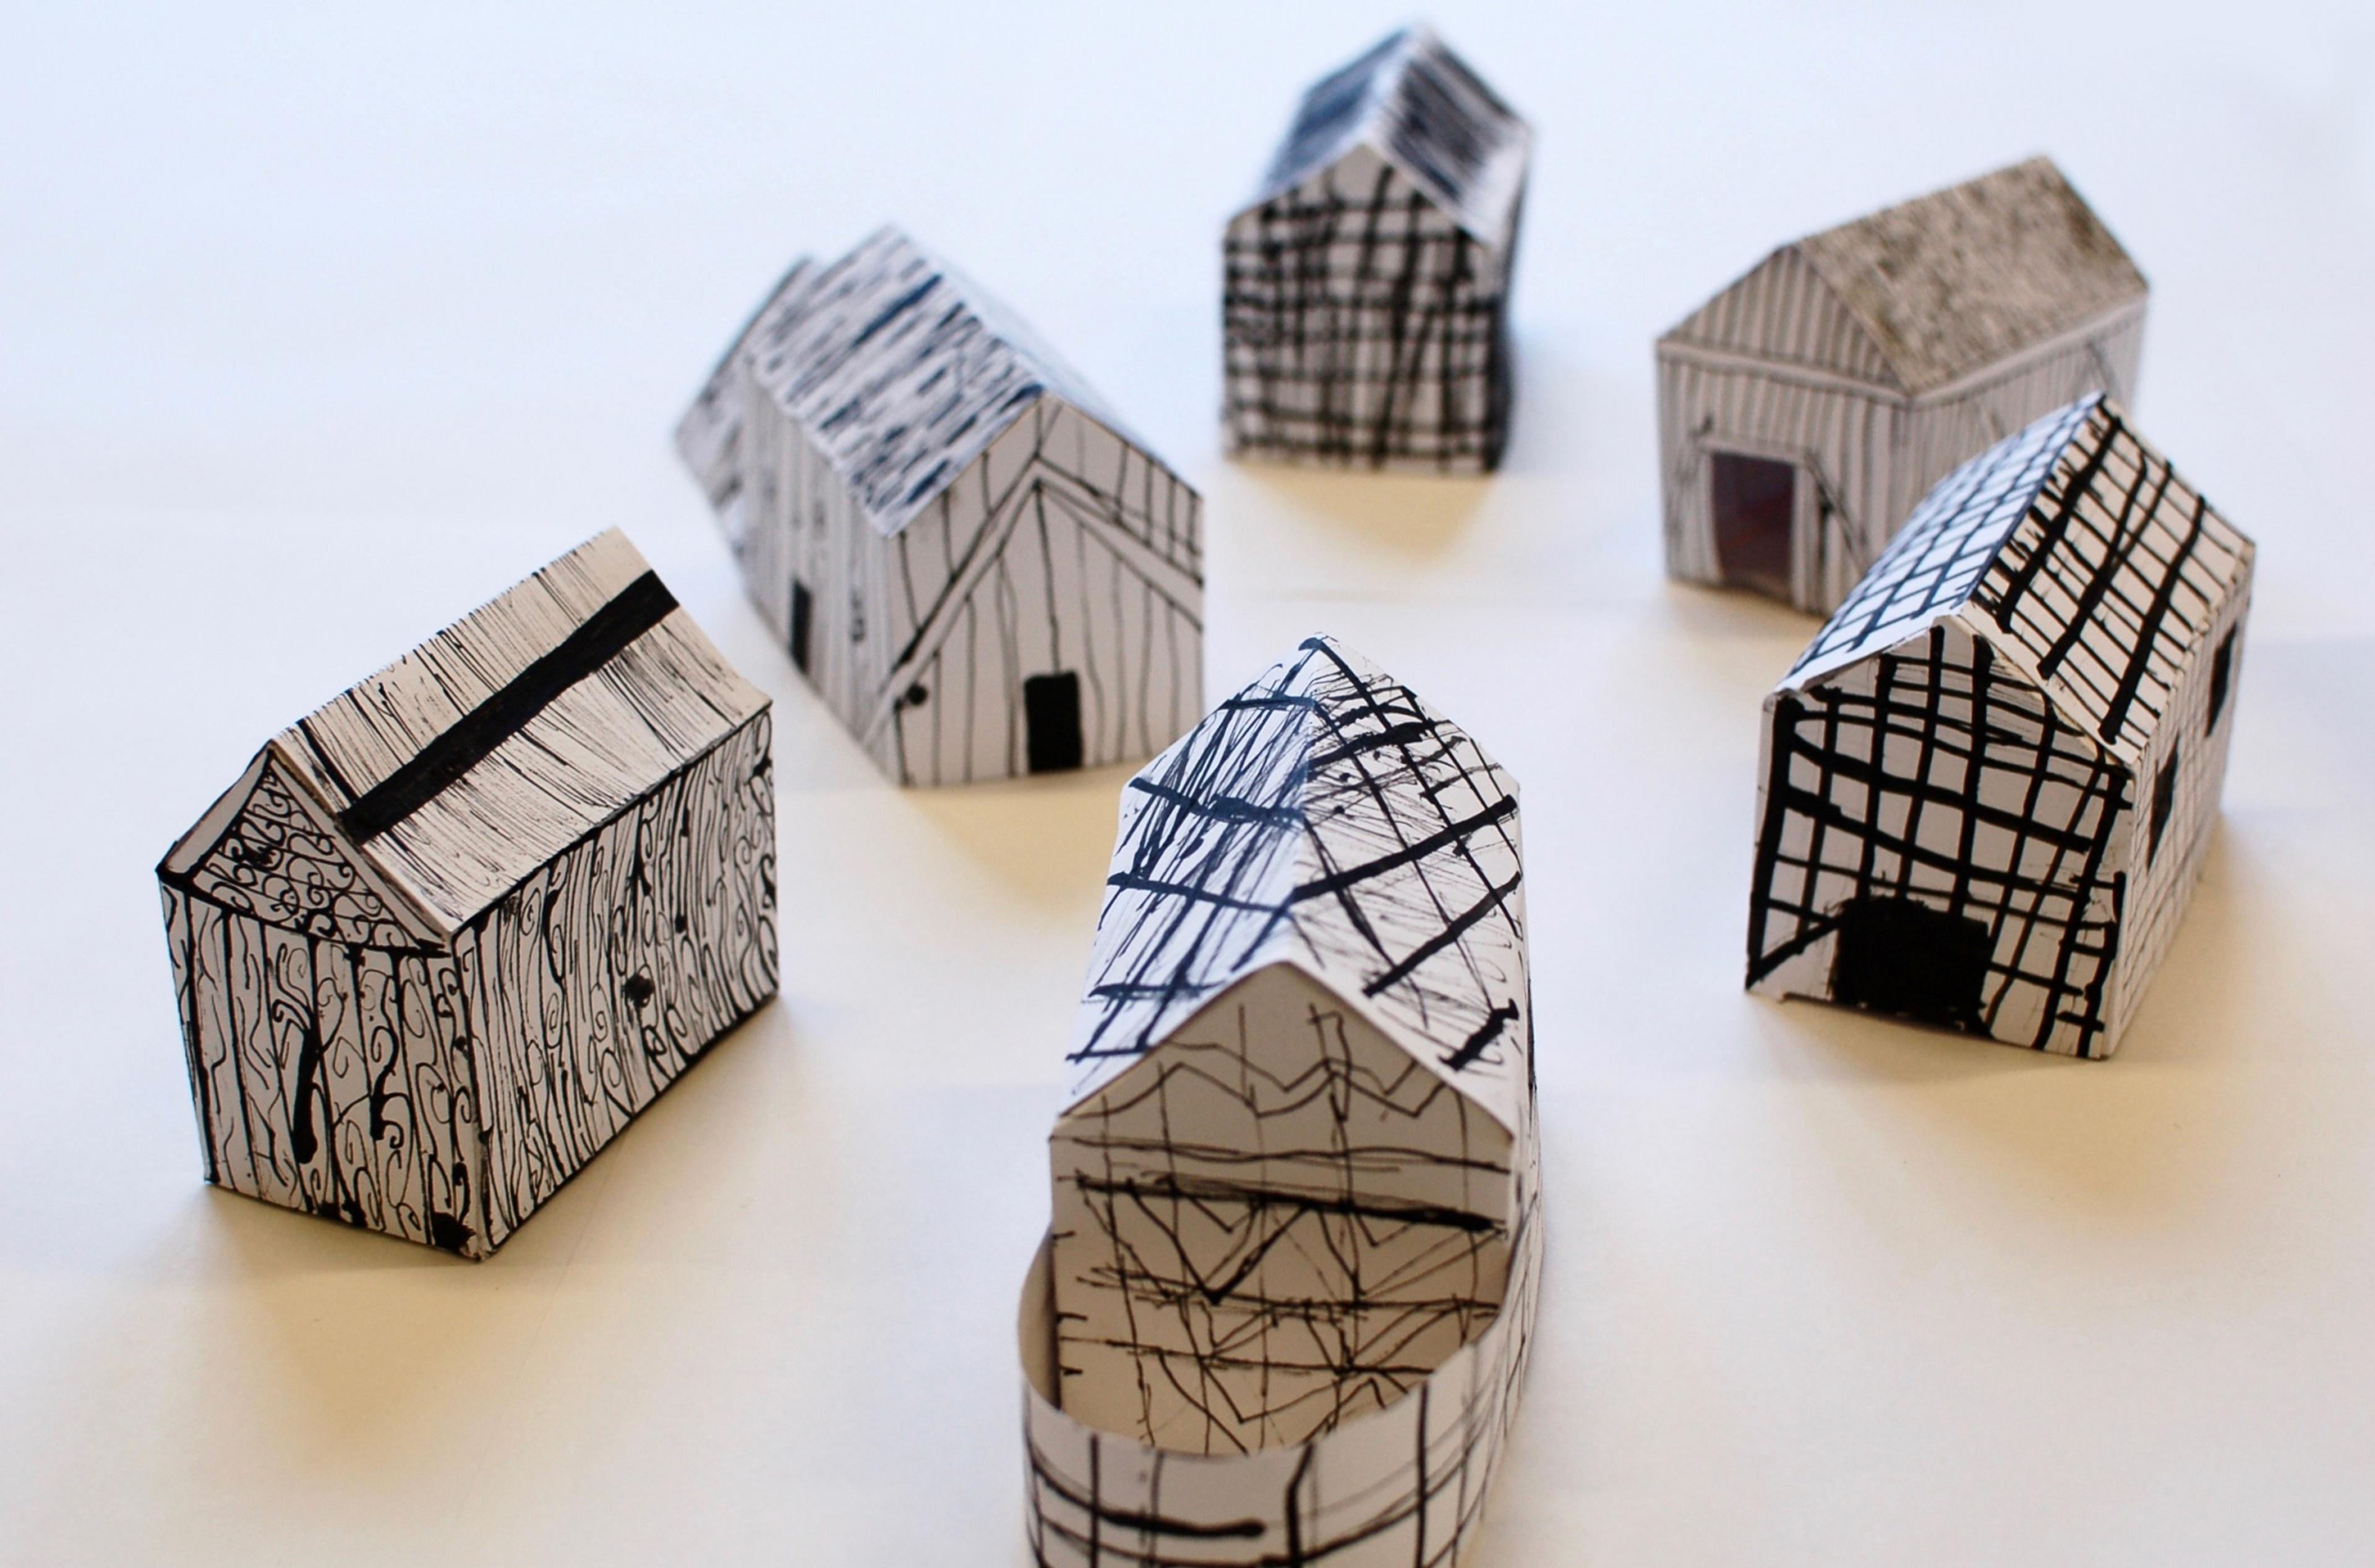 Photograph of 3D paper houses with ink patterns drawn on them